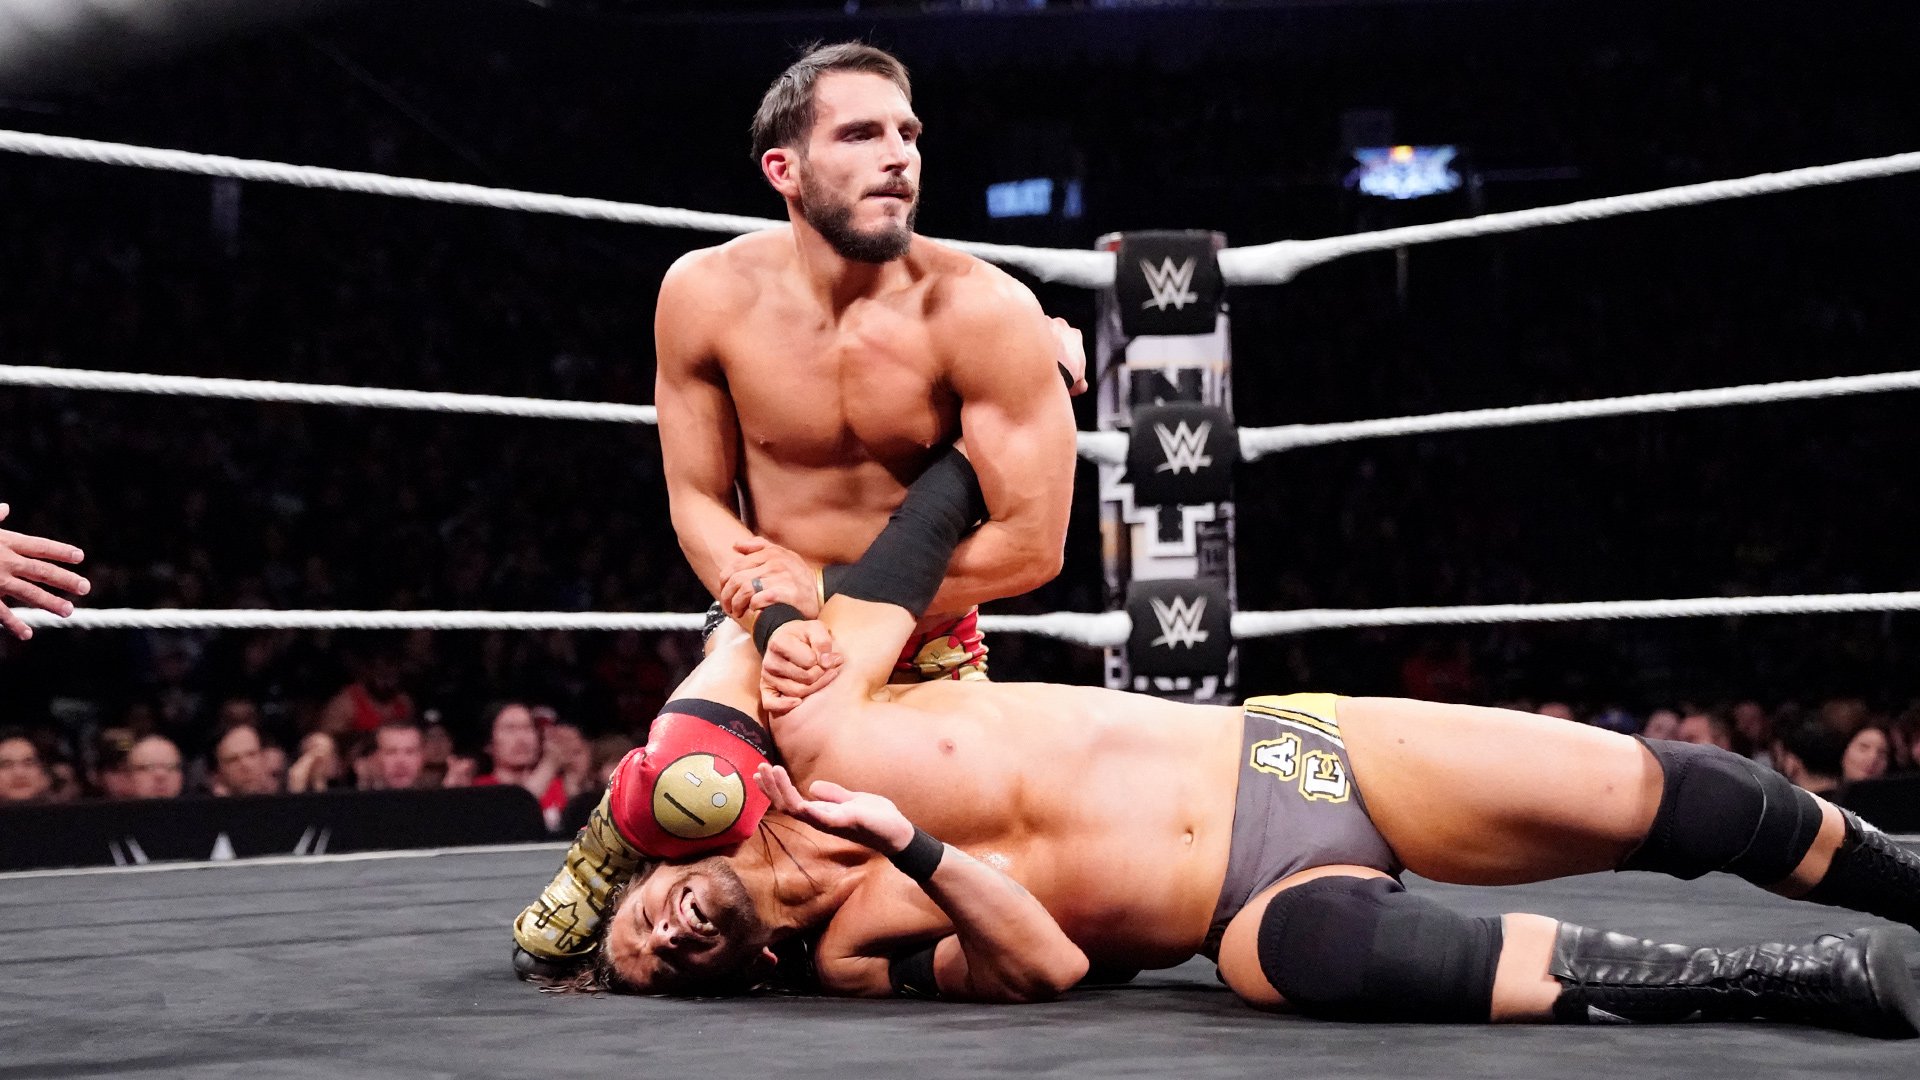 Johnny Gargano Goes For The Pin Against Adam Cole In A Out Of